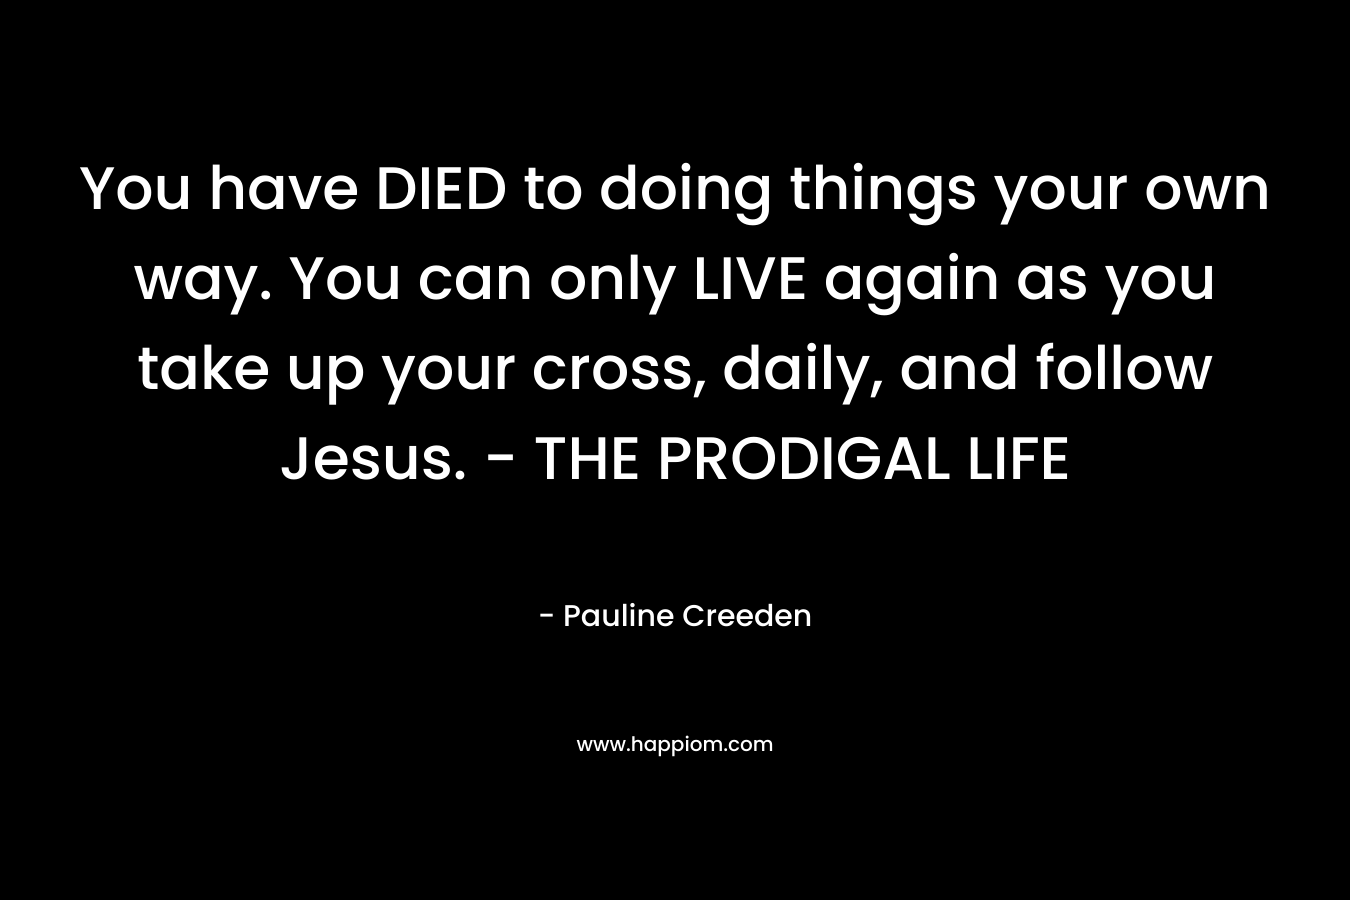 You have DIED to doing things your own way. You can only LIVE again as you take up your cross, daily, and follow Jesus. - THE PRODIGAL LIFE